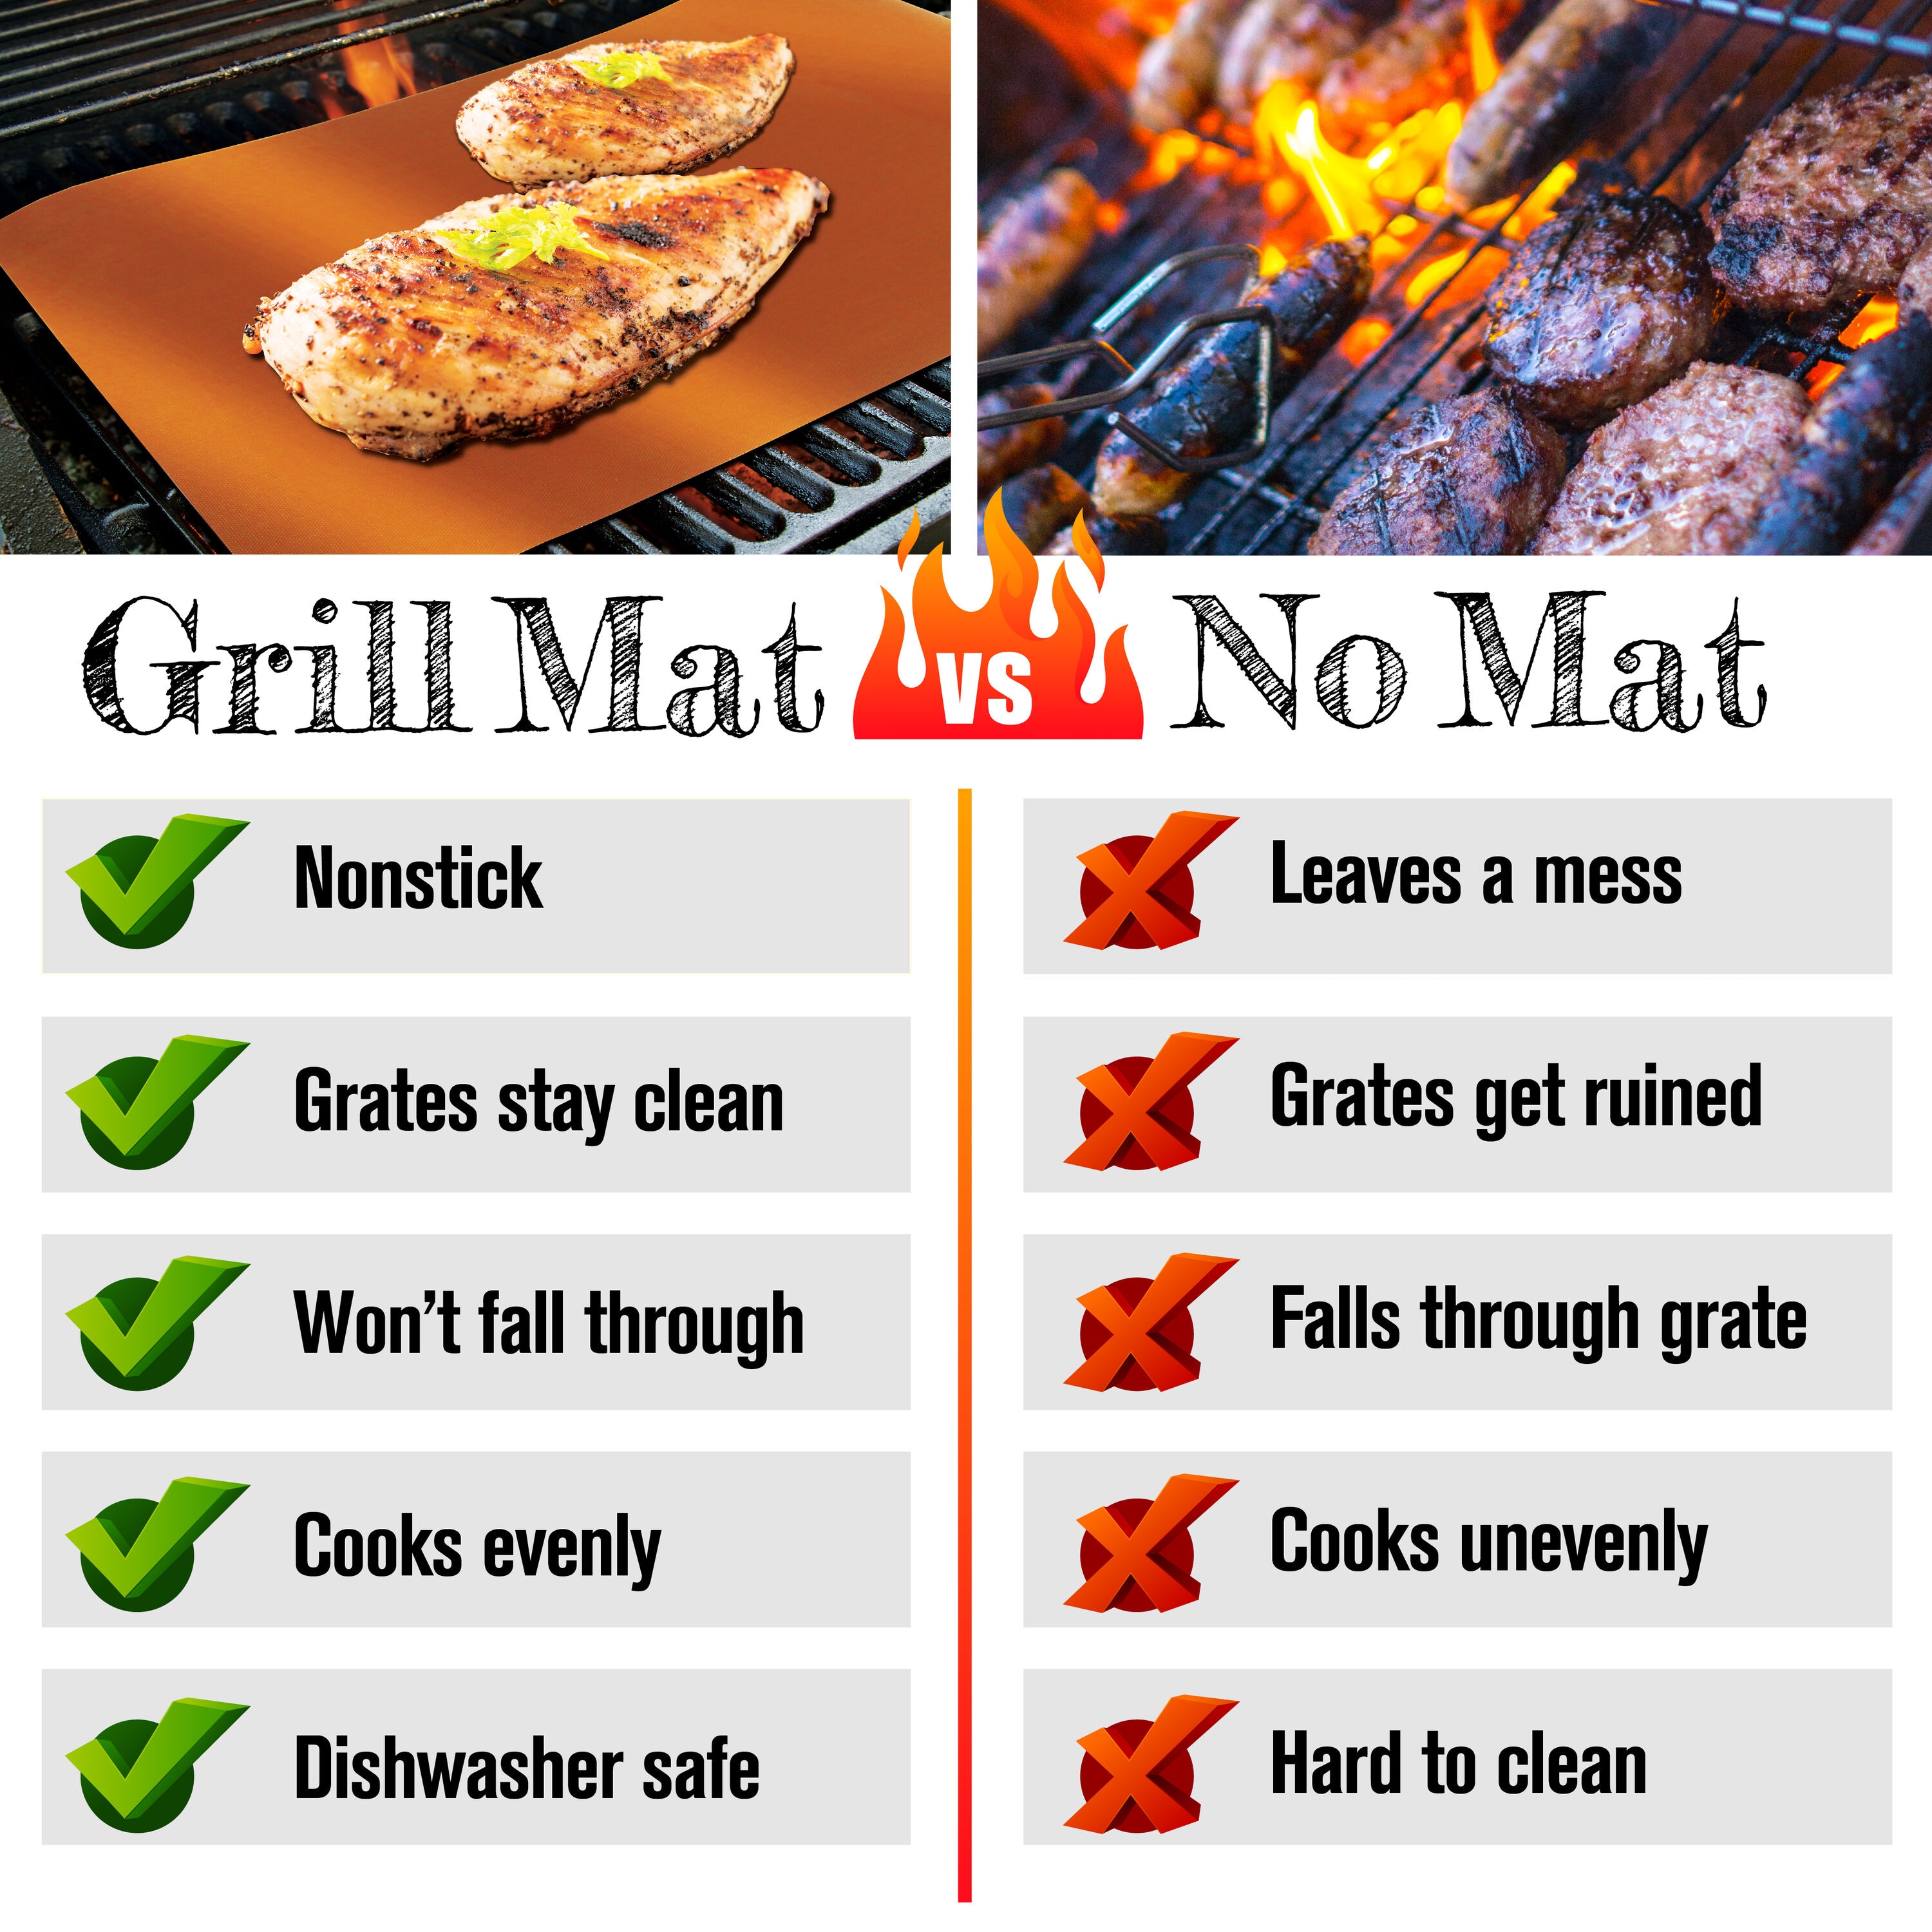 Gotham Steel Pro Copper Infused Grill & Bake Mat (3 Pack)